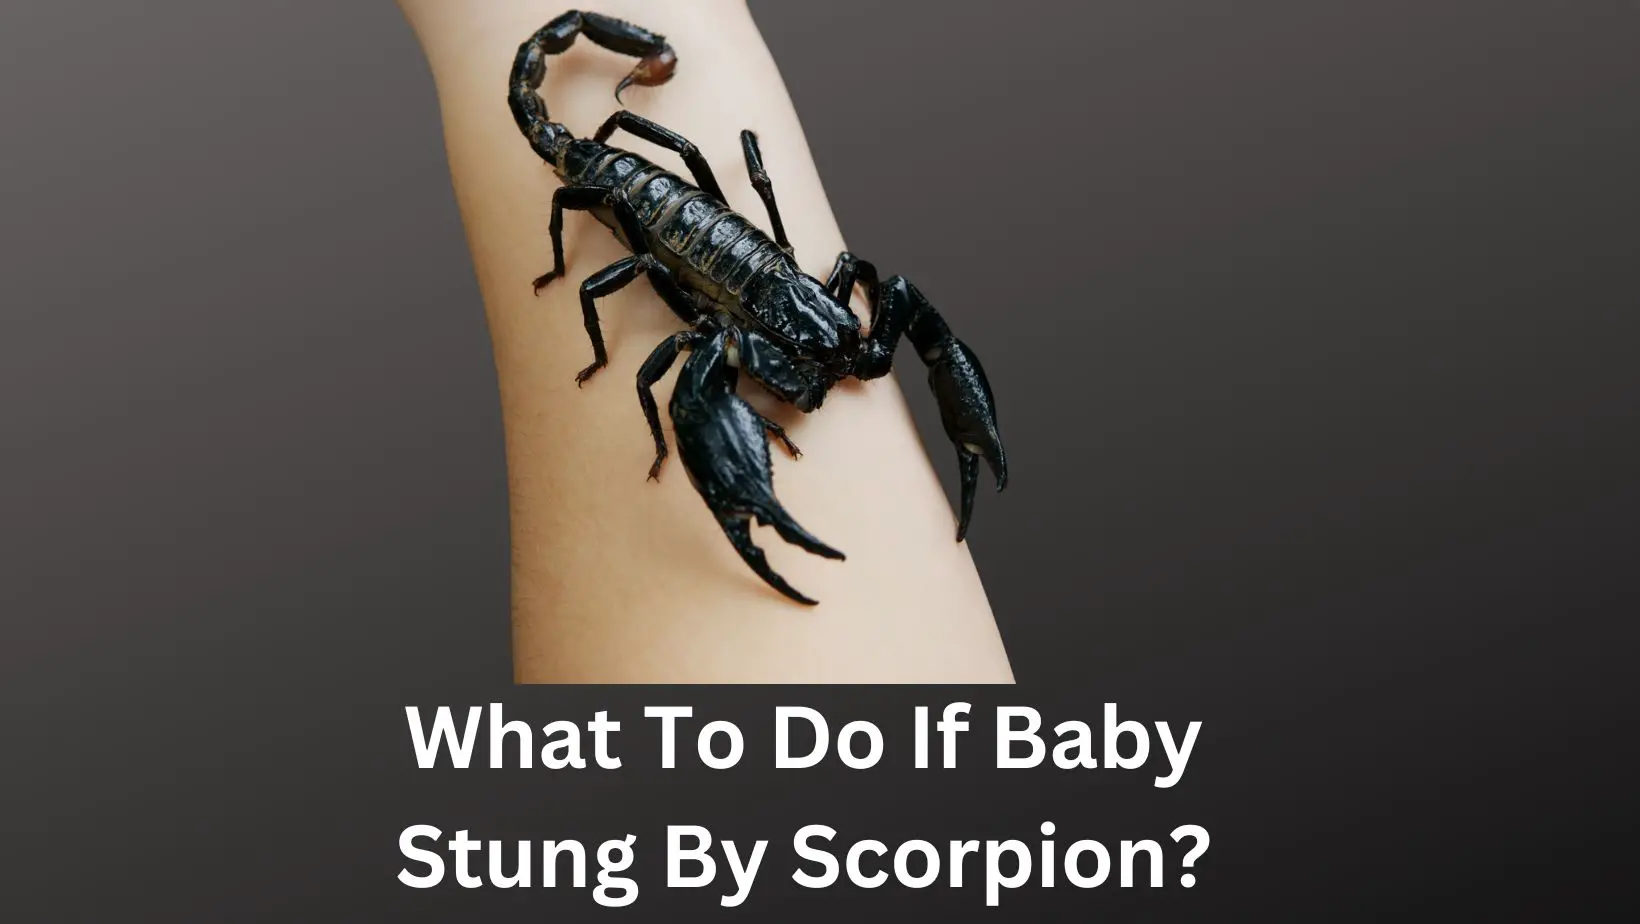 What To Do If Baby Stung By Scorpion